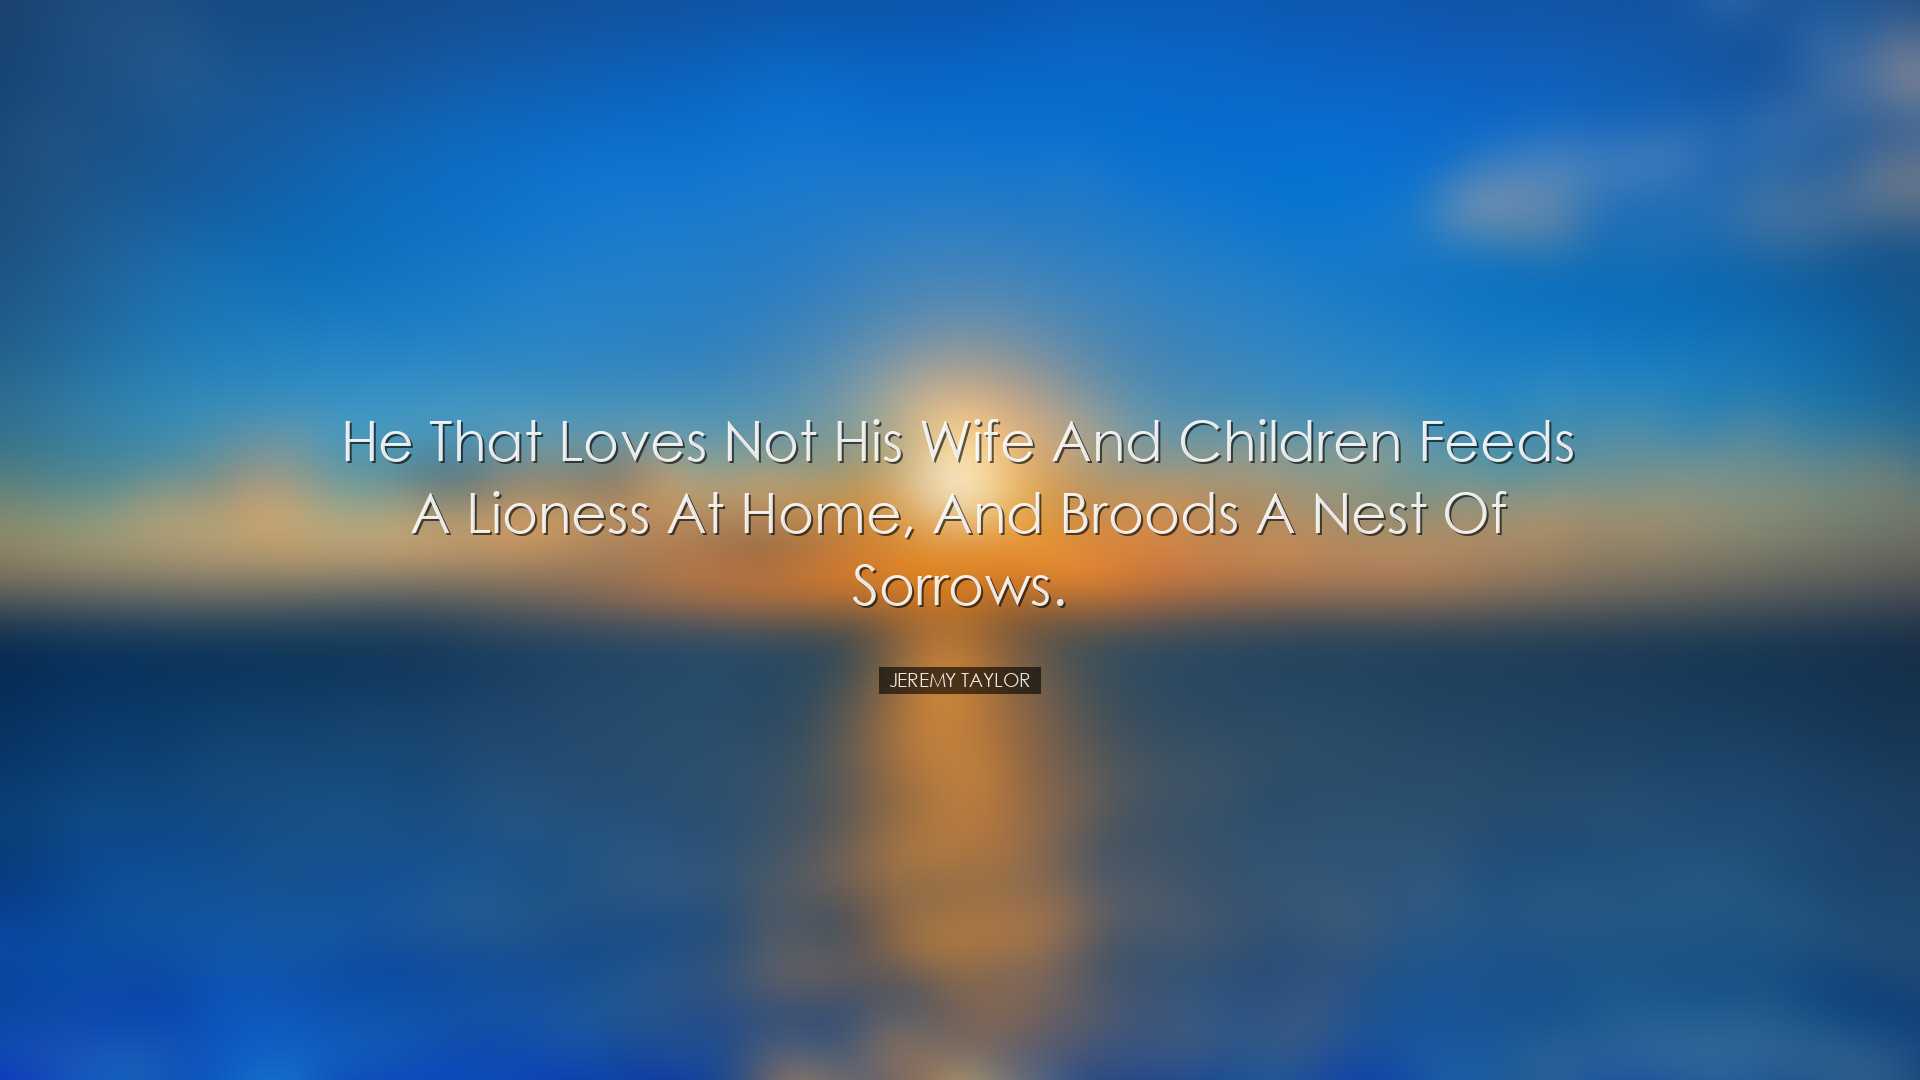 He that loves not his wife and children feeds a lioness at home, a